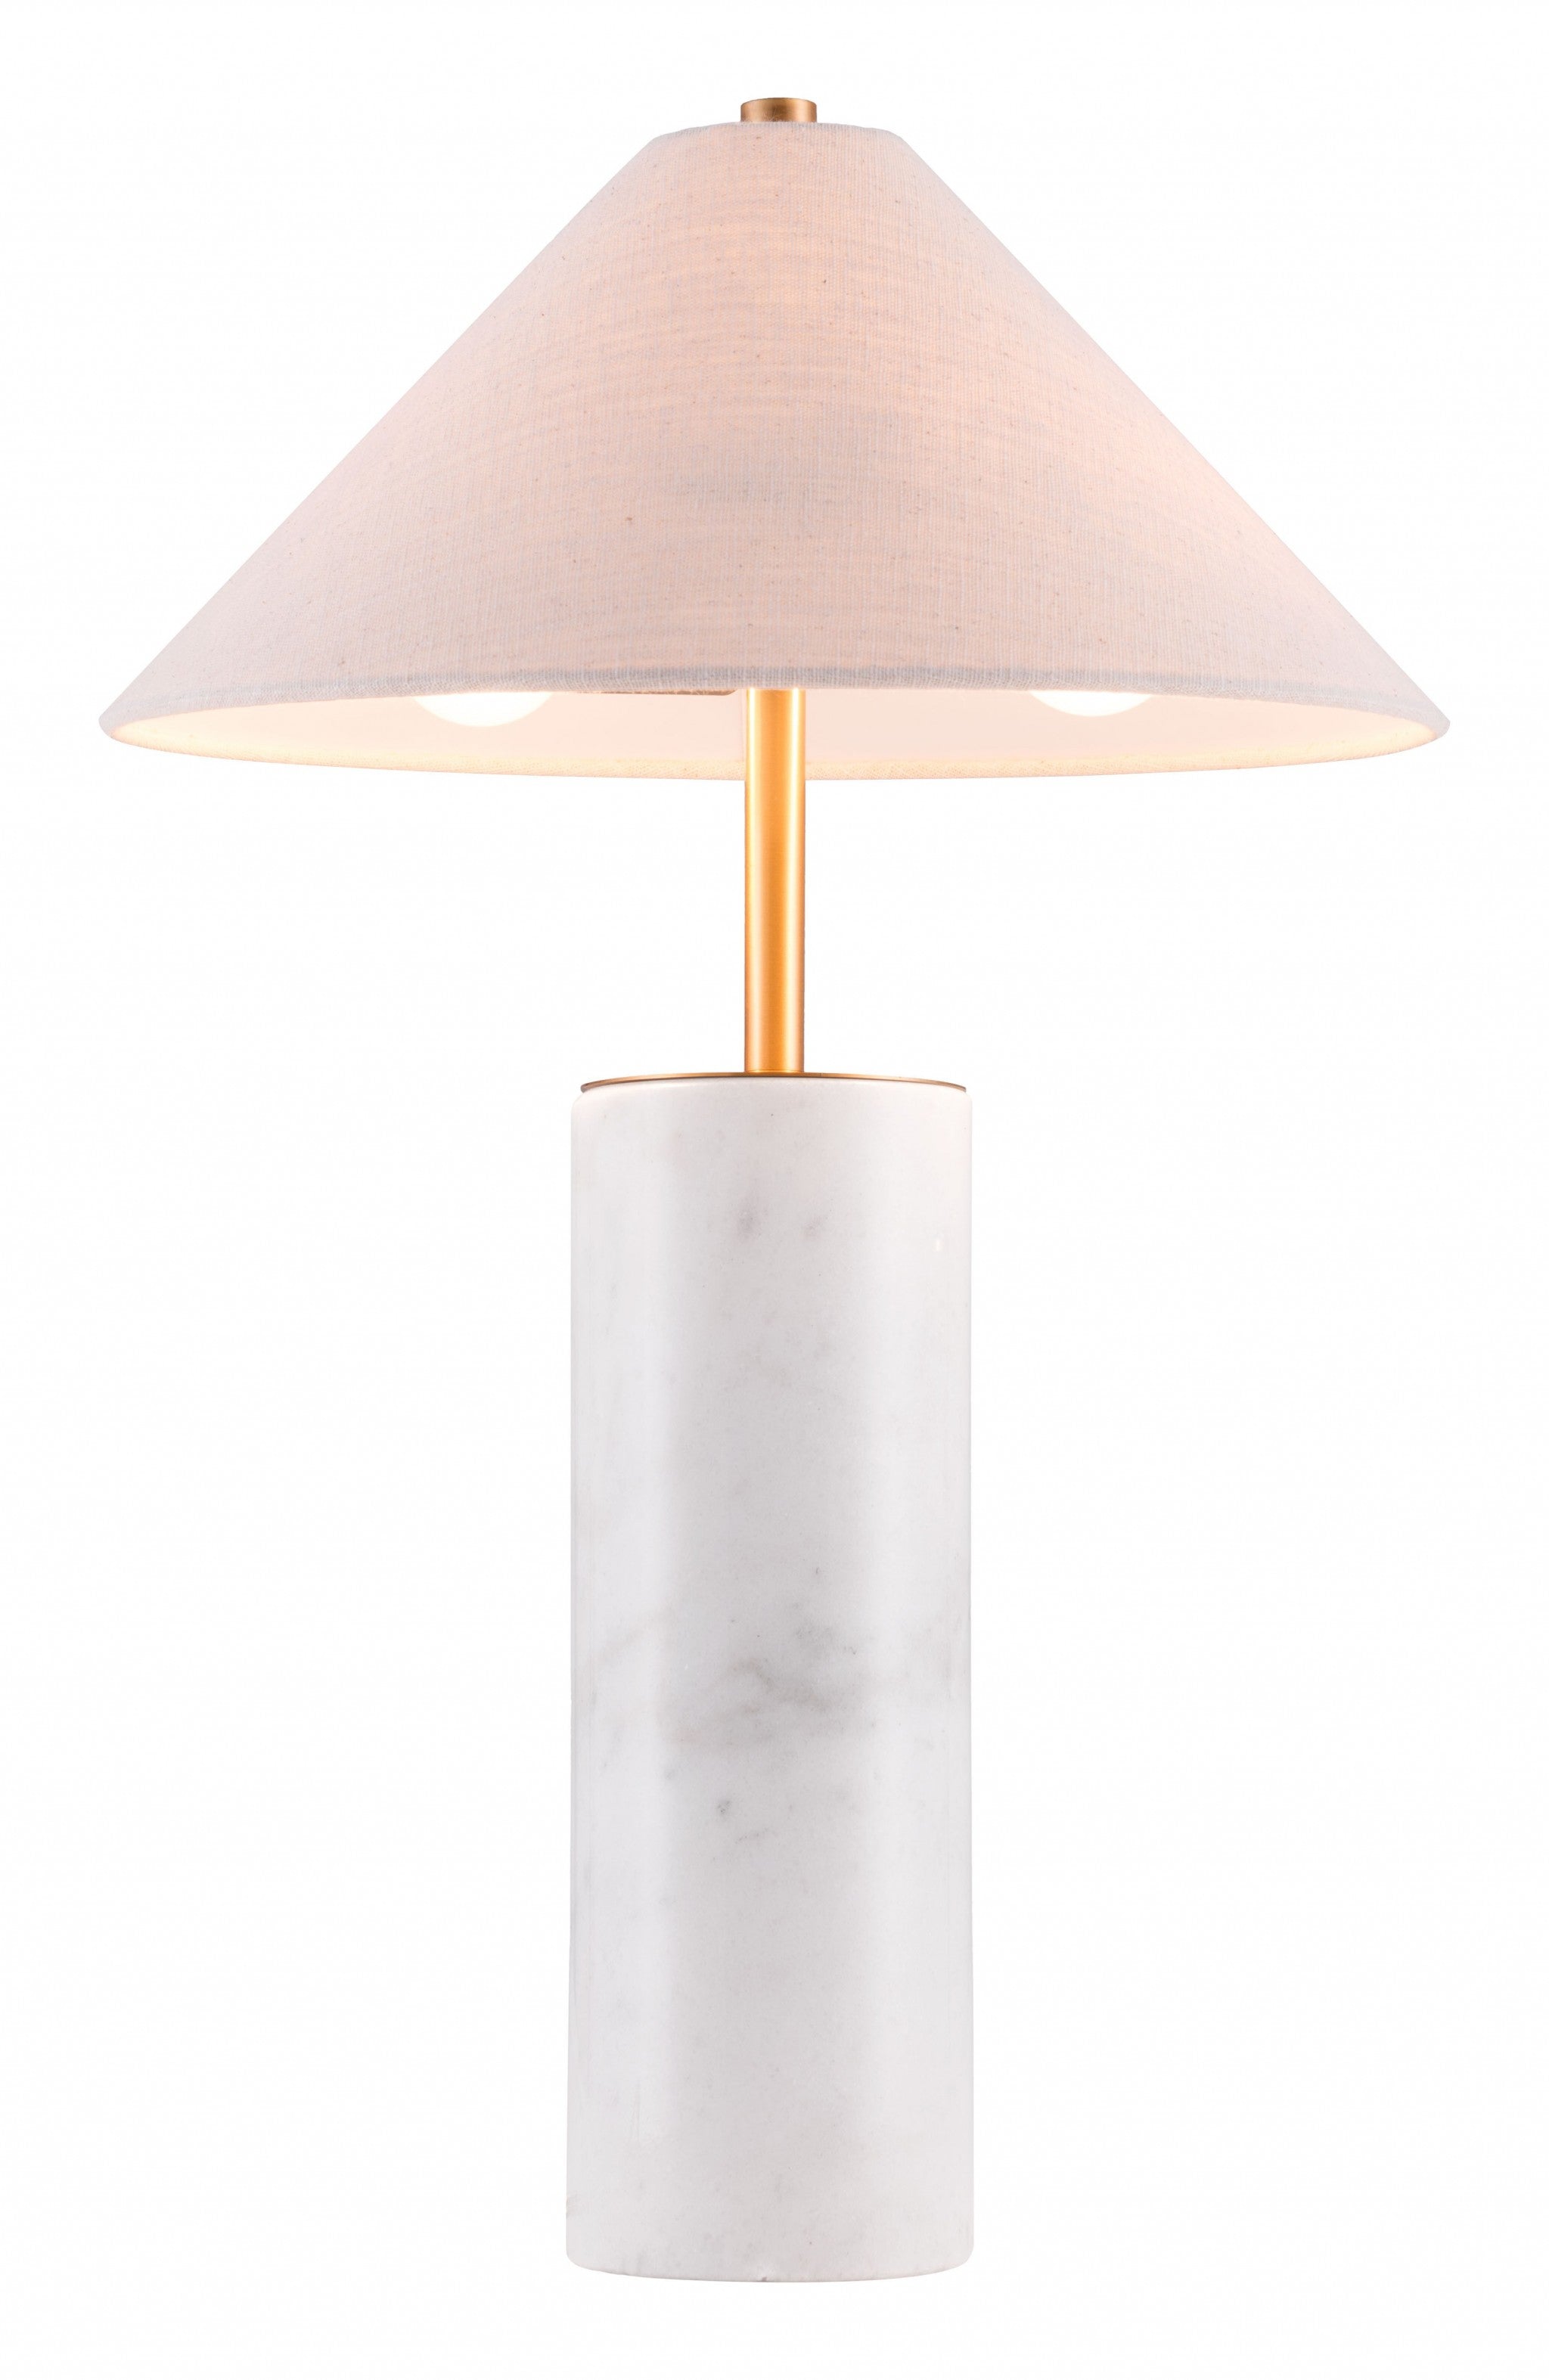 55" White Metal Bedside Table Lamp With Beige Empire Shade